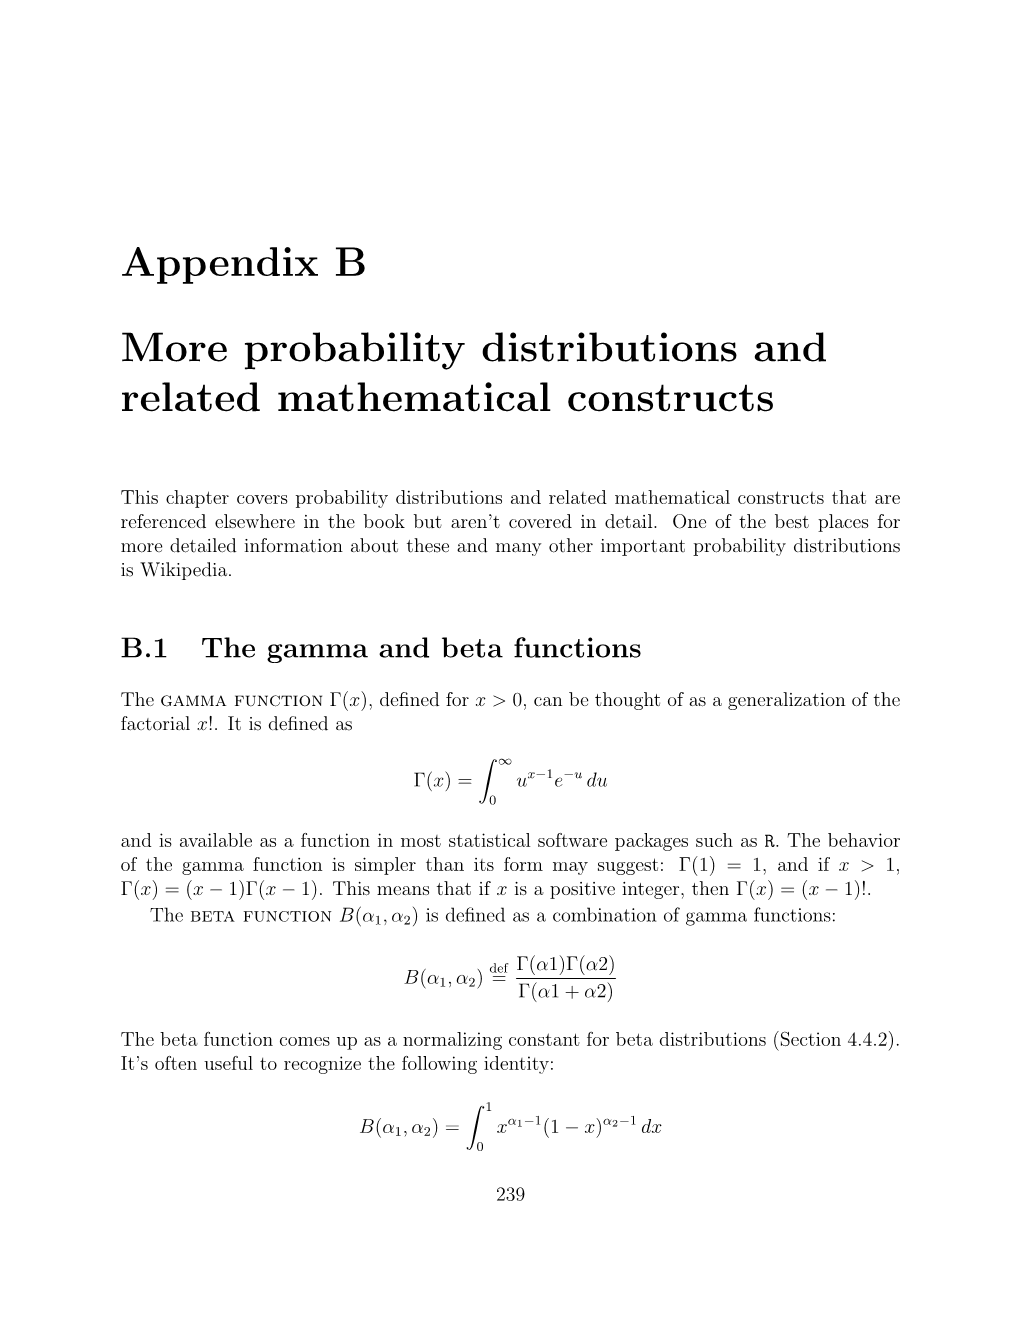 Probability Distributions and Related Mathematical Constructs